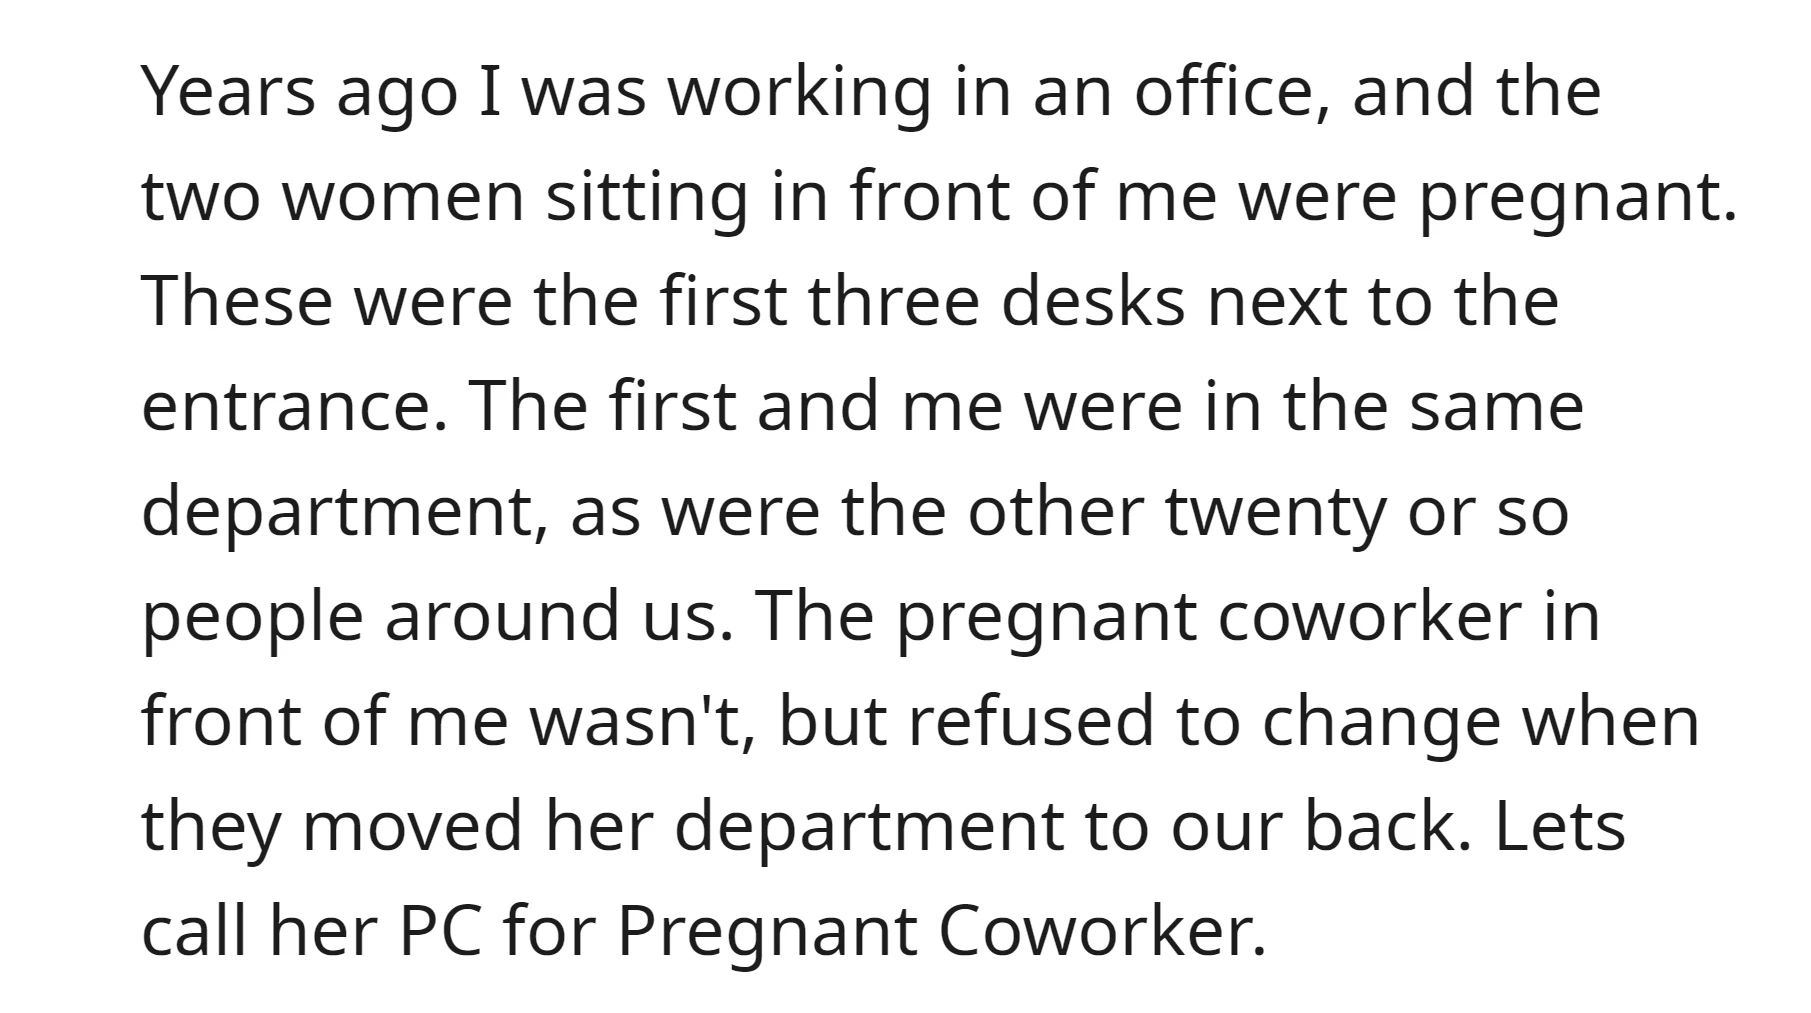 Pregnant coworker in front of OP refused to change desks when her department was relocated to the back